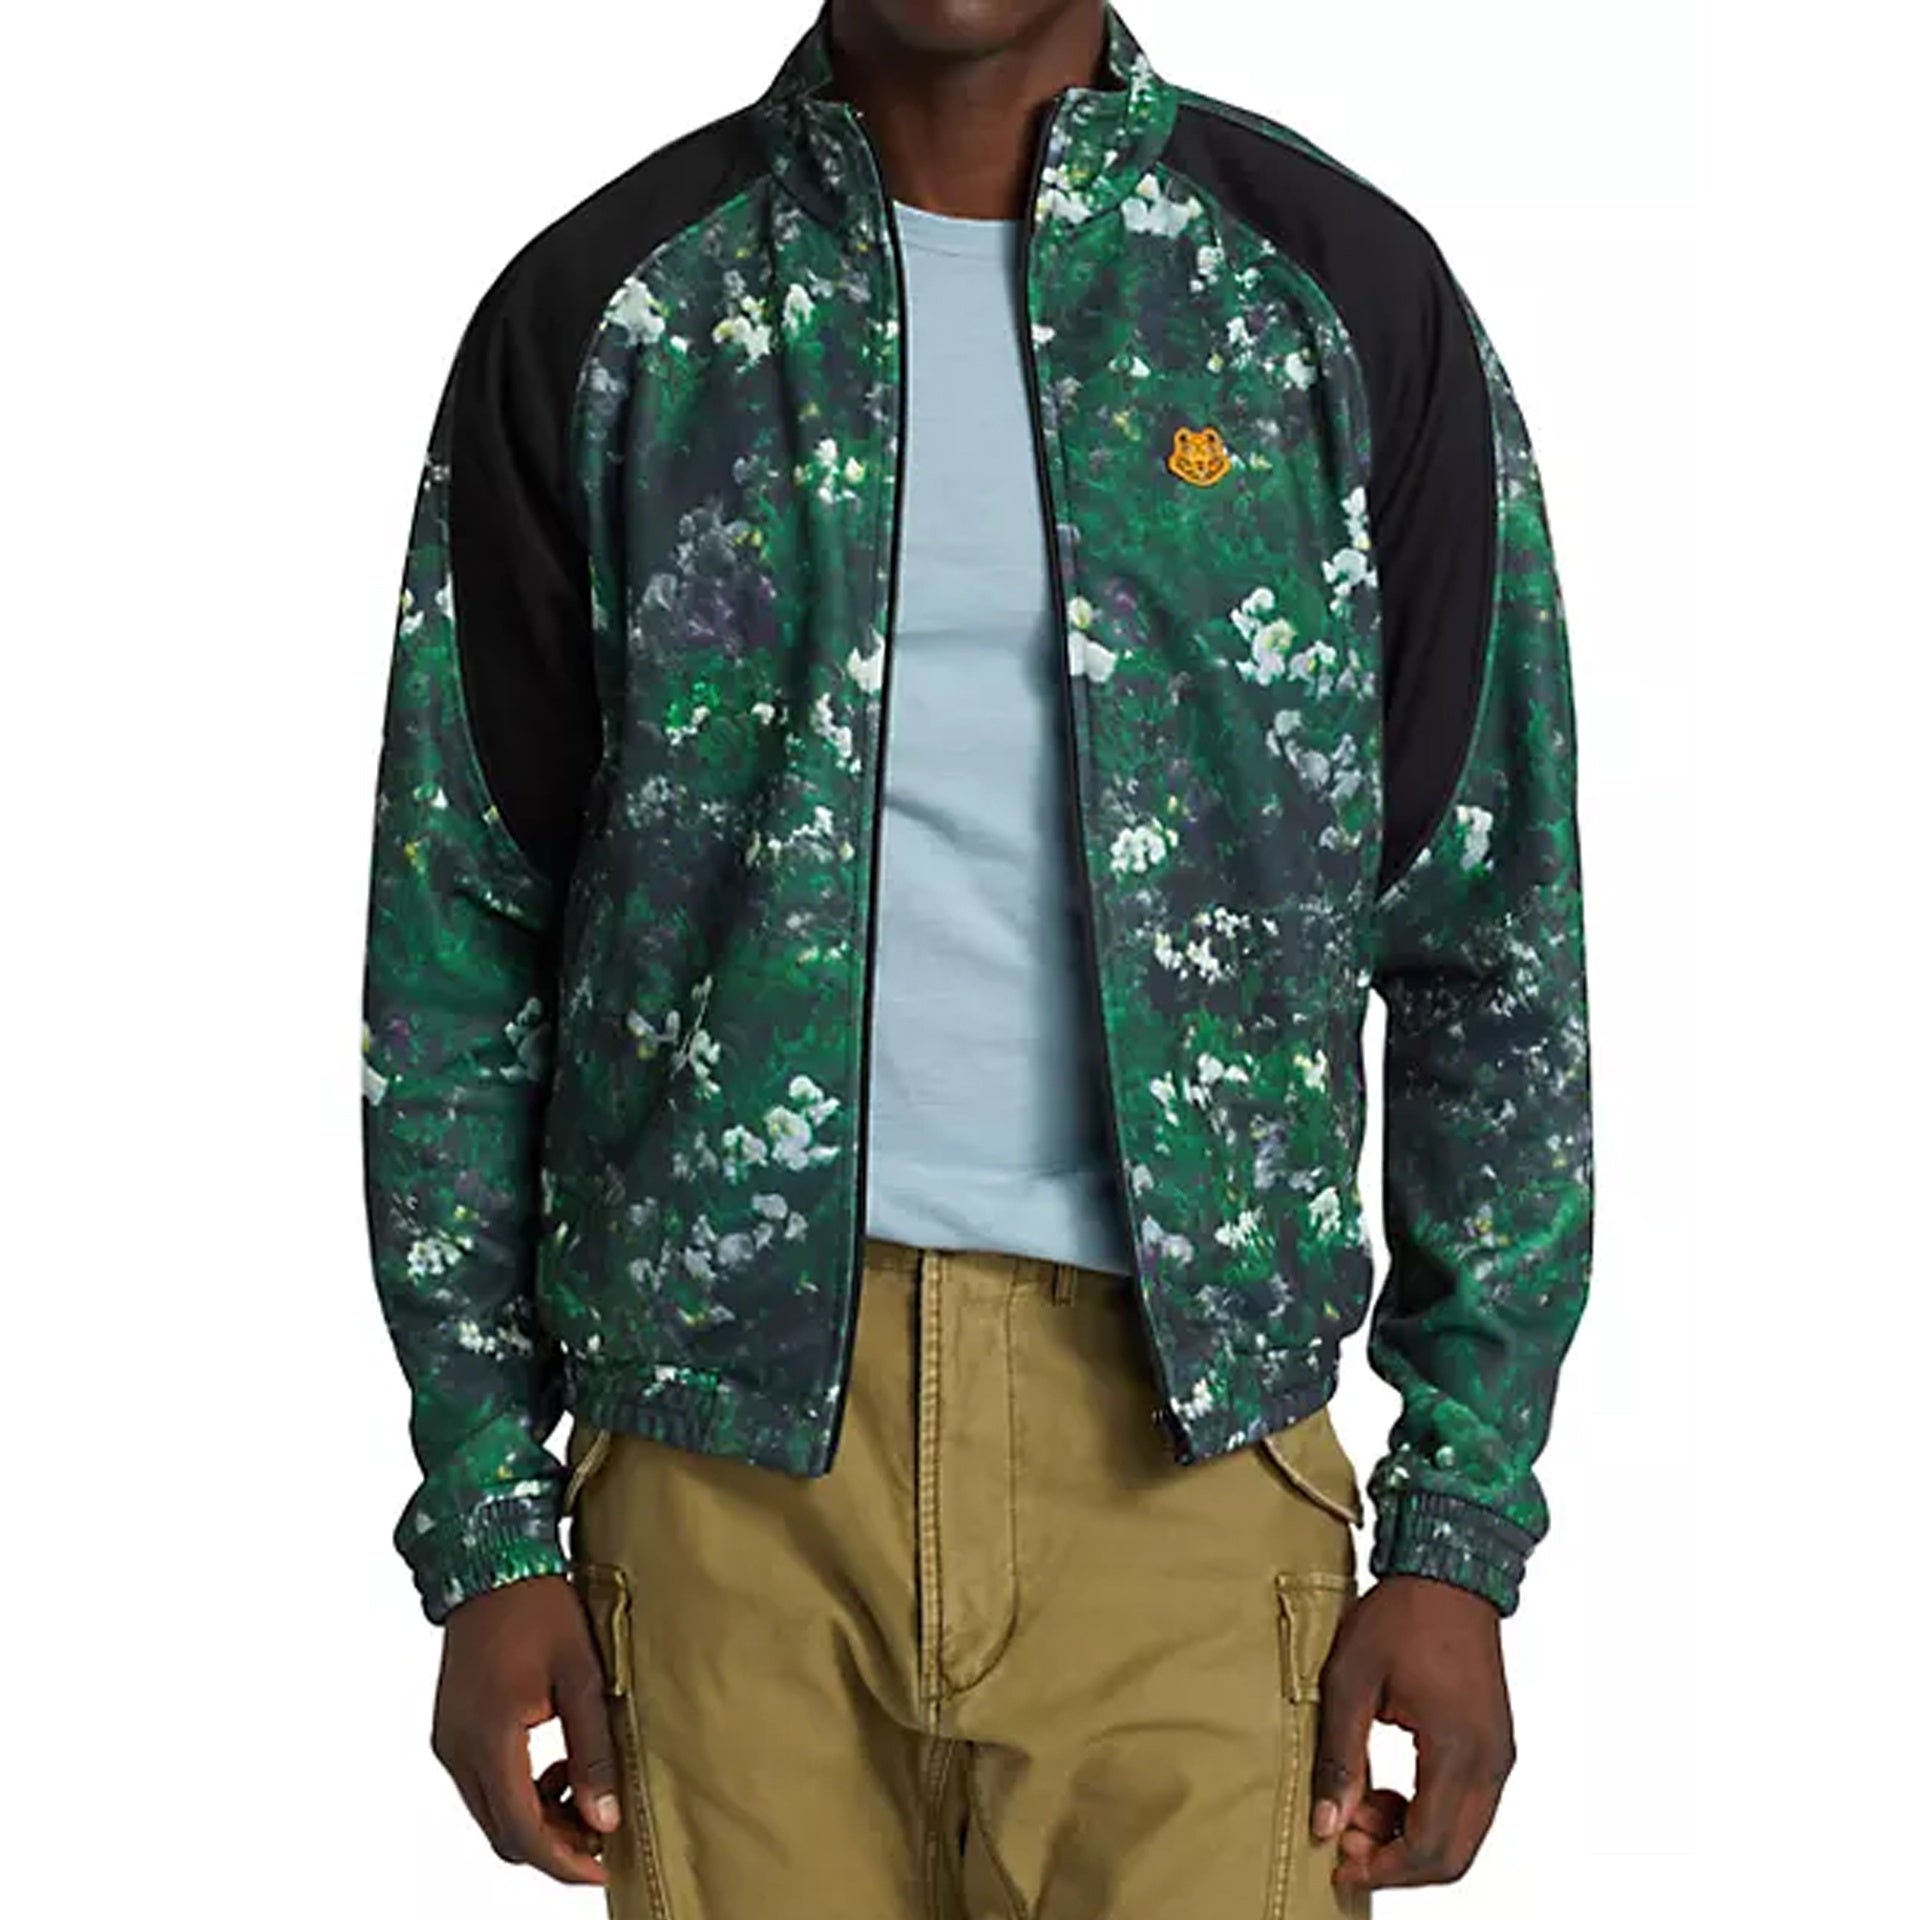 KENZO-OUTLET-SALE-Kenzo-Printed-Track-Jacket-Jacken-Mantel-ARCHIVE-COLLECTION-2.jpg